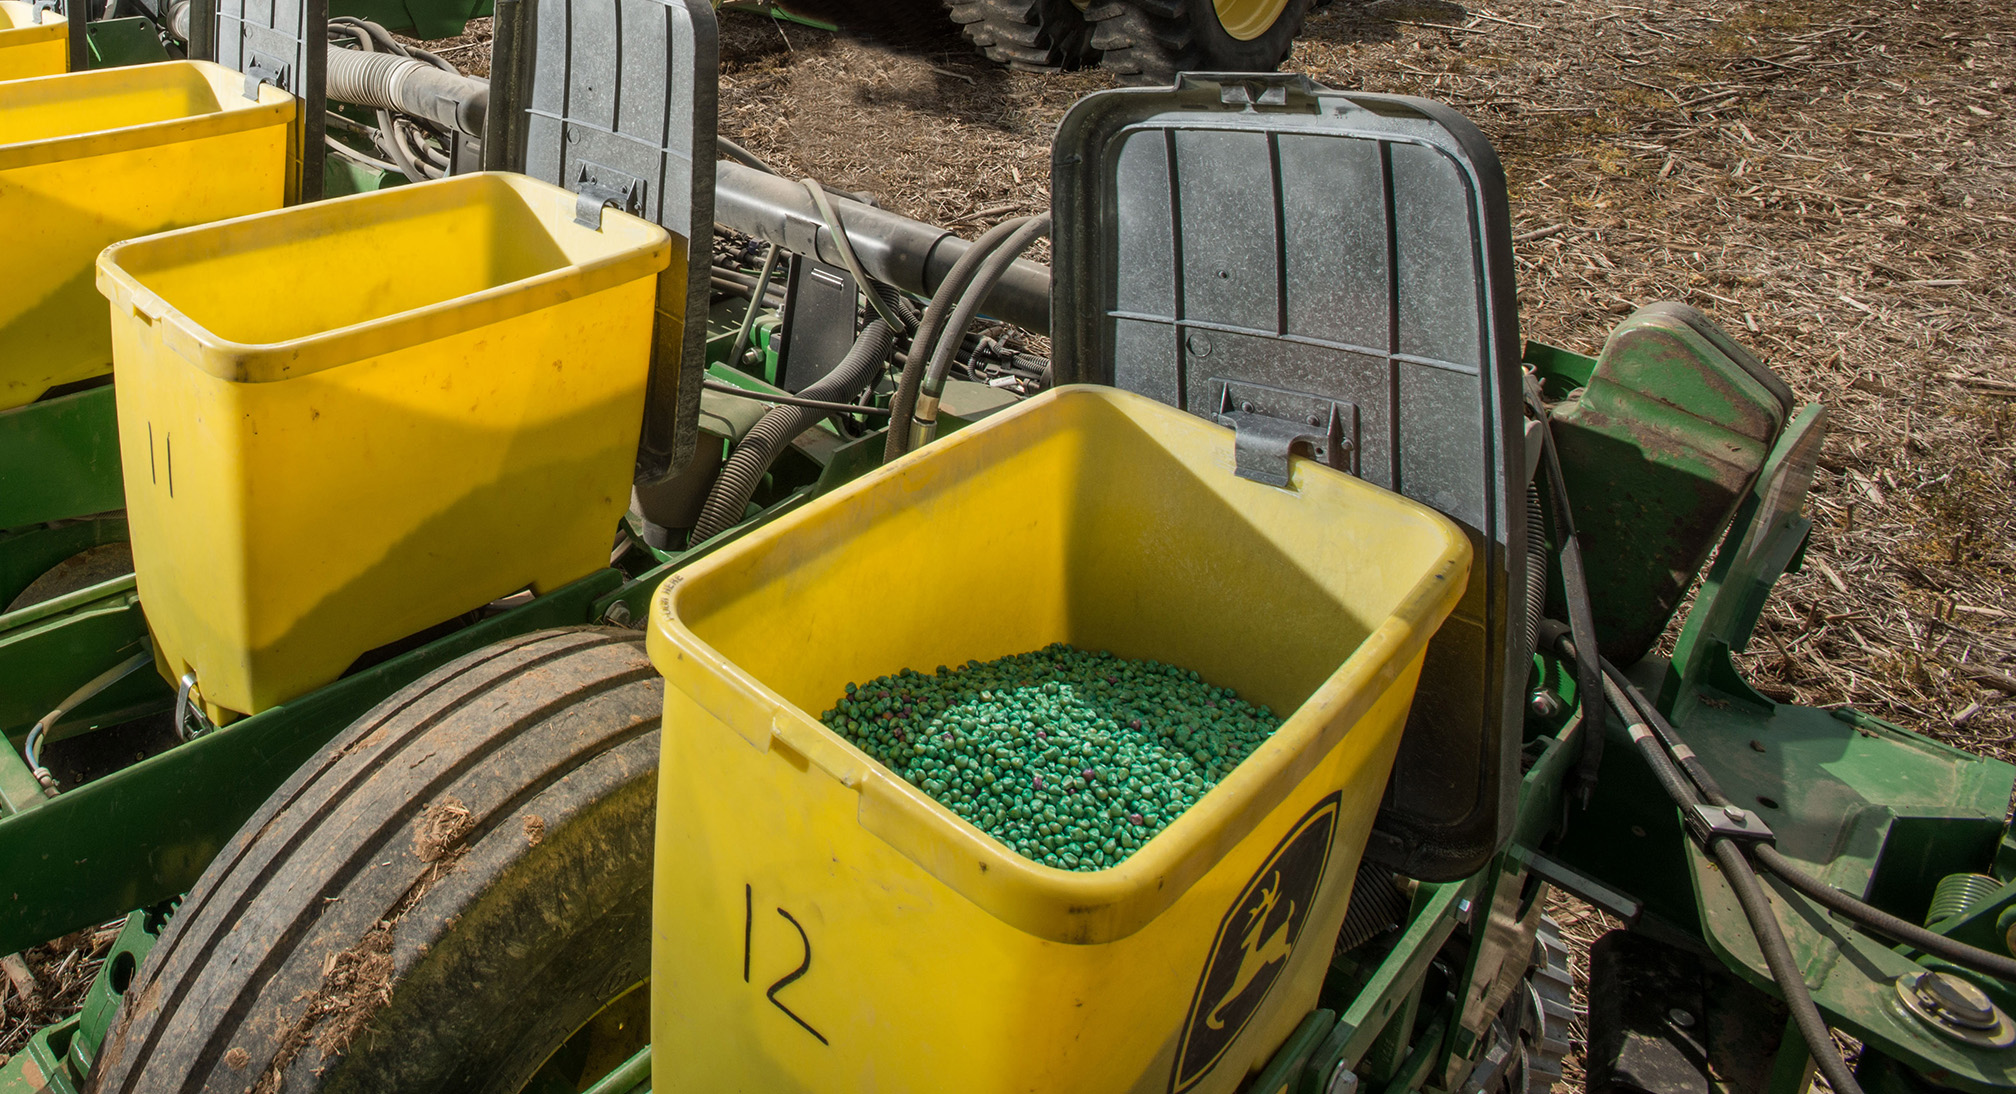 "A close-up of a seed drill, a large piece of farming equipment towed behind a tractor to sow seed. The metal frame of the seed drill is green and grubby. The tire has dried mud caked on it. Several rectangular yellow plastic bins on the drill are full of seed corn. The seed corn is green and pink."